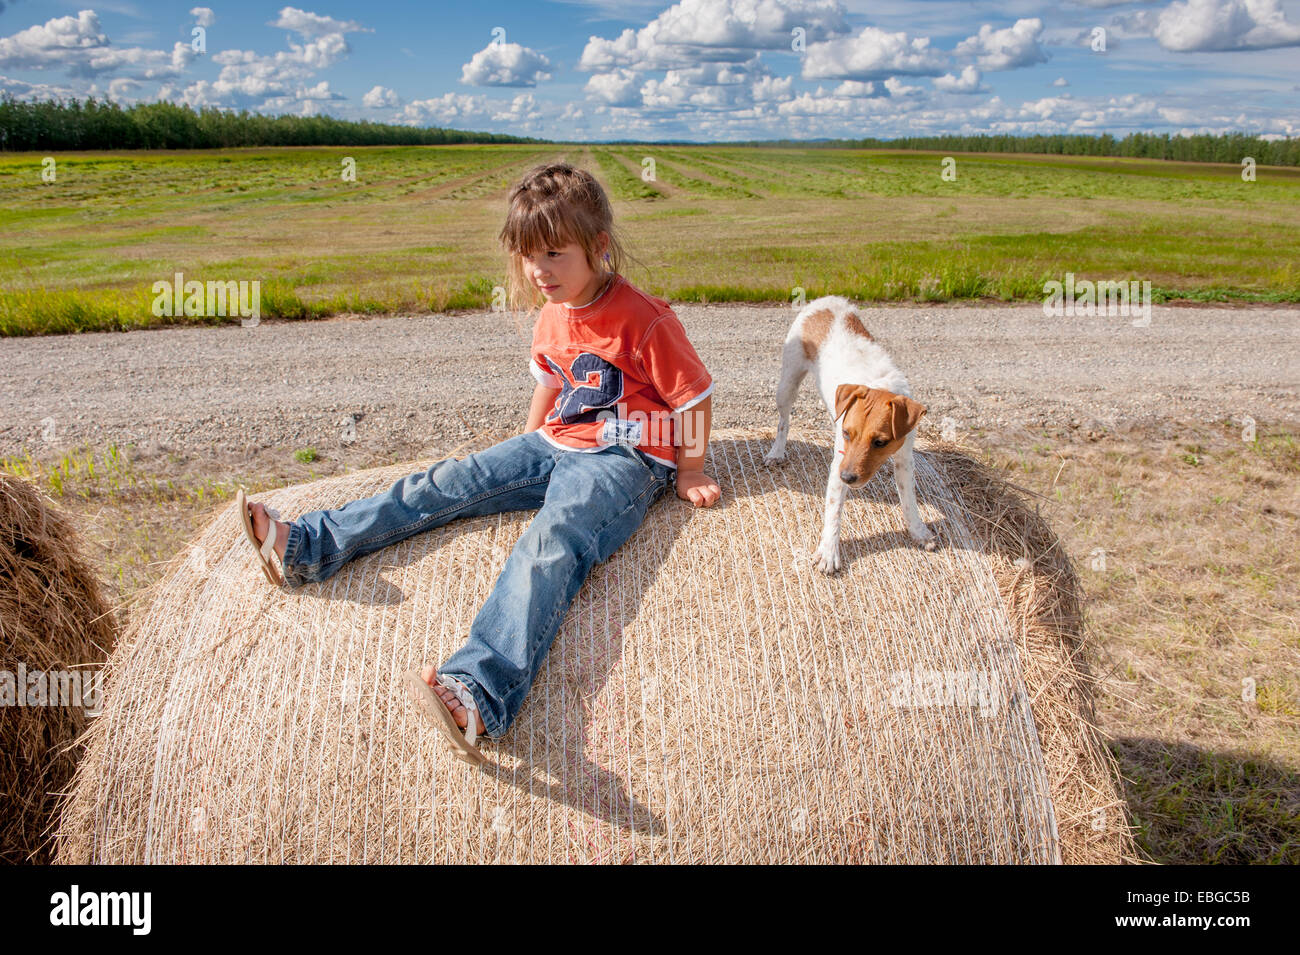 Portrait of a little girl sitting on a bale of hay with her dog Stock Photo